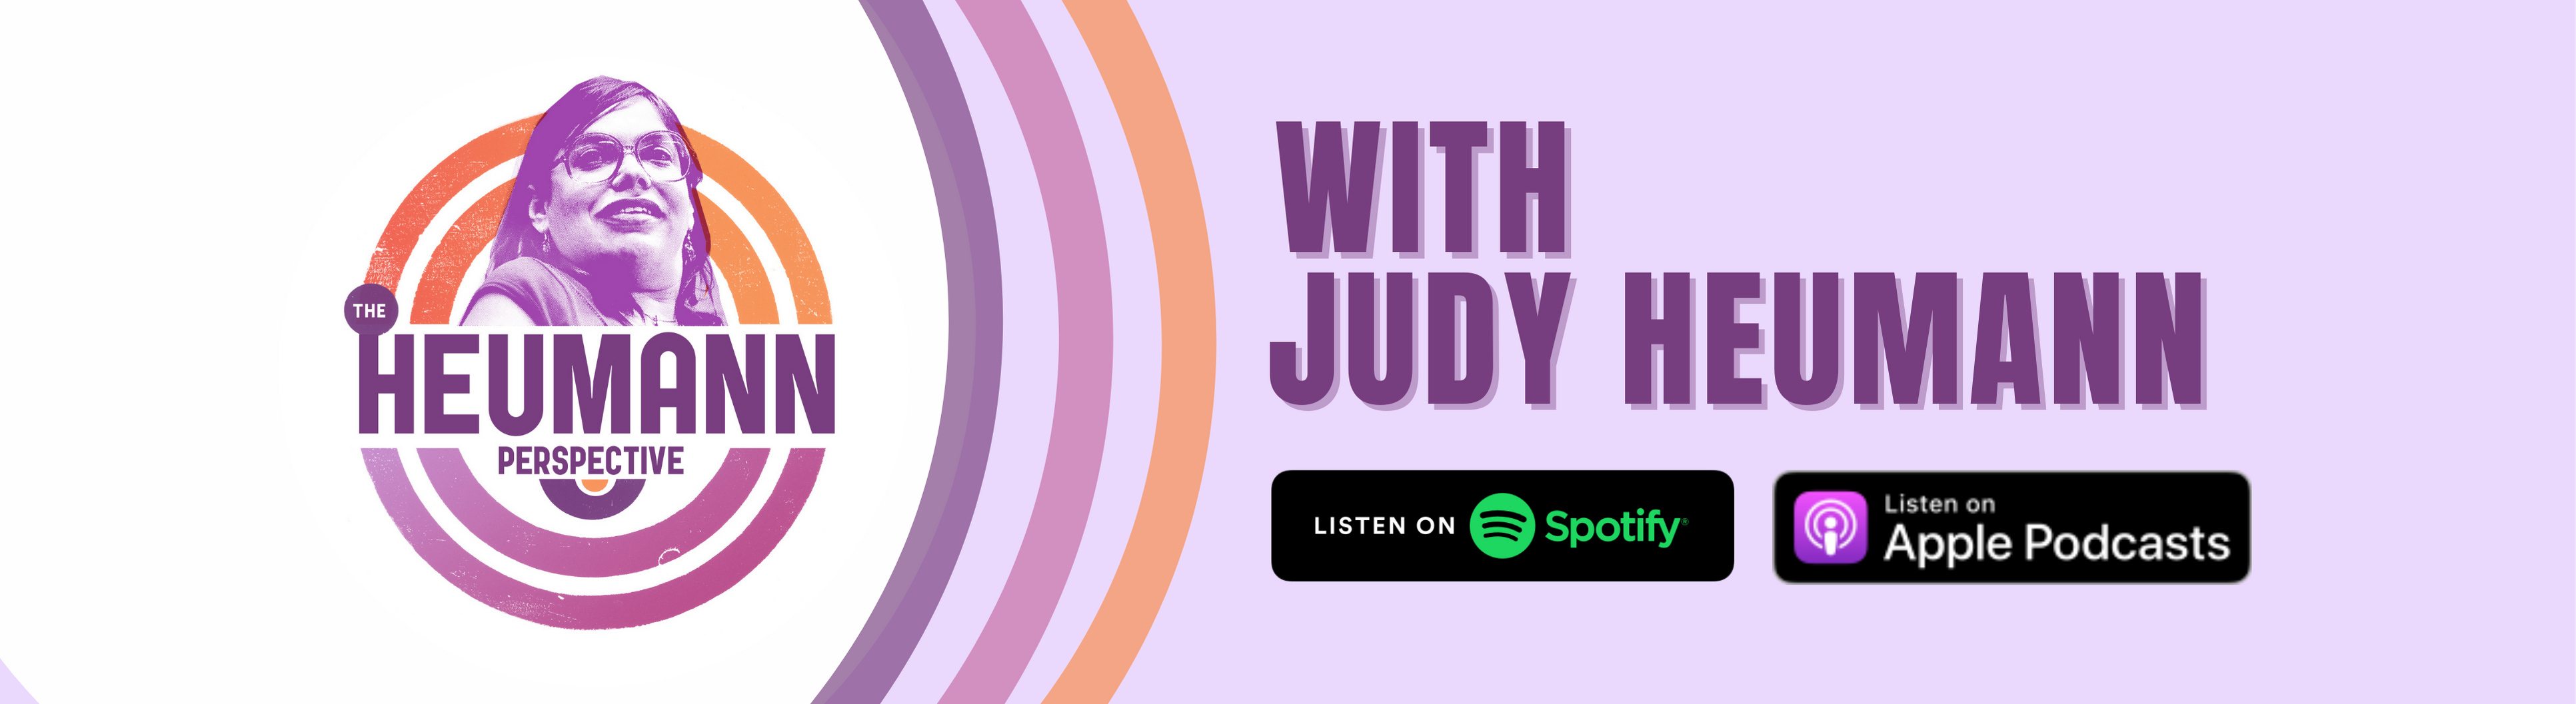 A graphic with a lilac background with a white semi circle on the left with the logo of The Heumann Perspective on top of it. There are three curved lines next to the circle going in order of purple, pink and orange. On the right is bold purple text that reads "with Judy Heumann." Underneath that are the logos for Spotify and Apple Podcasts